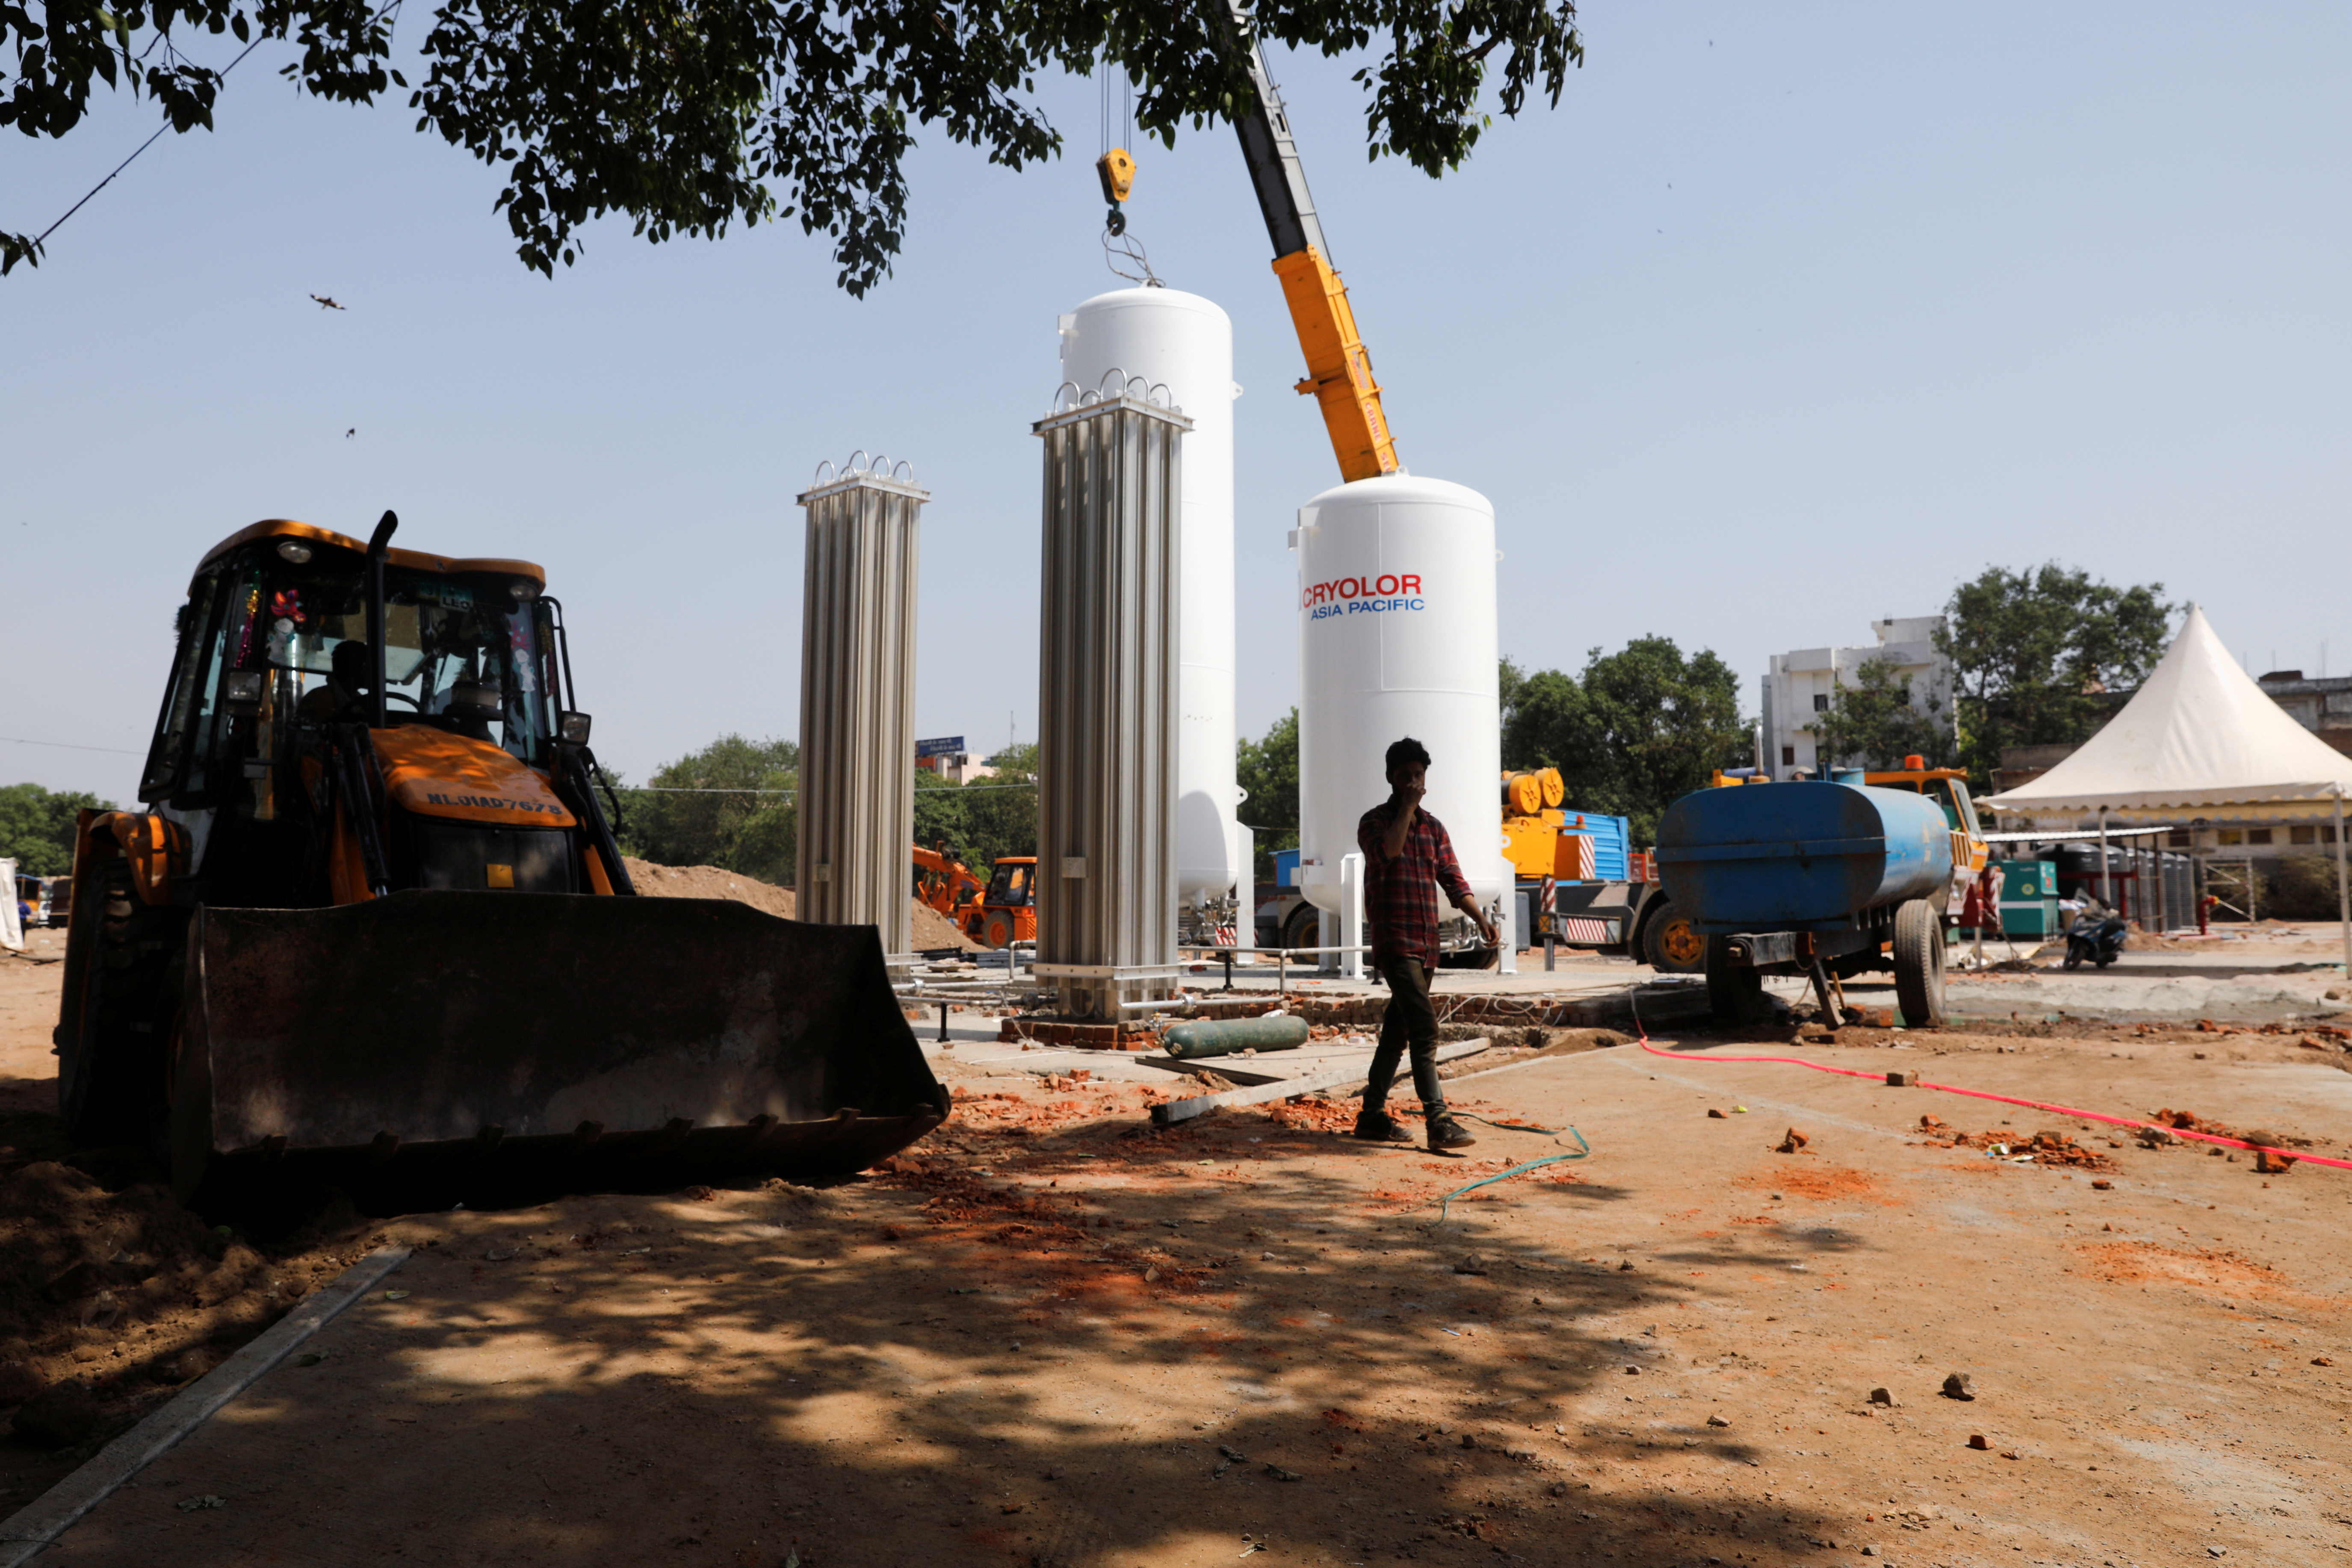 Man walks in front of oxygen tanks at temporary COVID-19 care facility in New Delhi